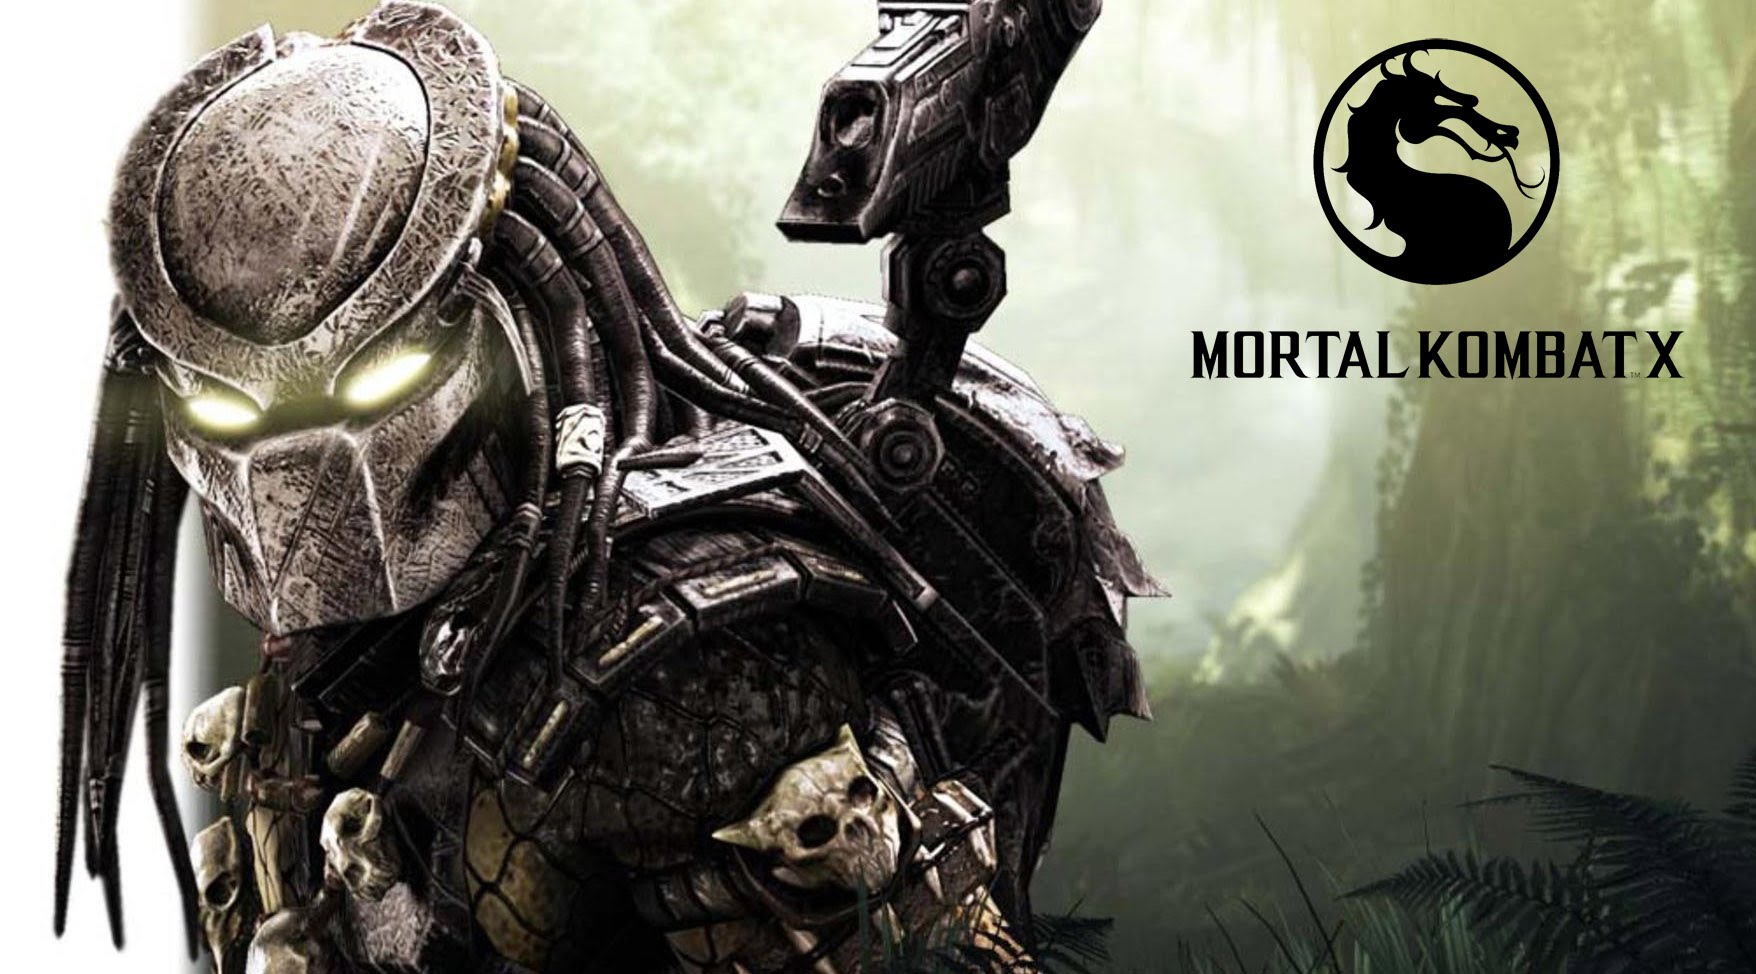 “Mortal Kombat X” releases official trailer for The Predator - Better Get To The Choppa